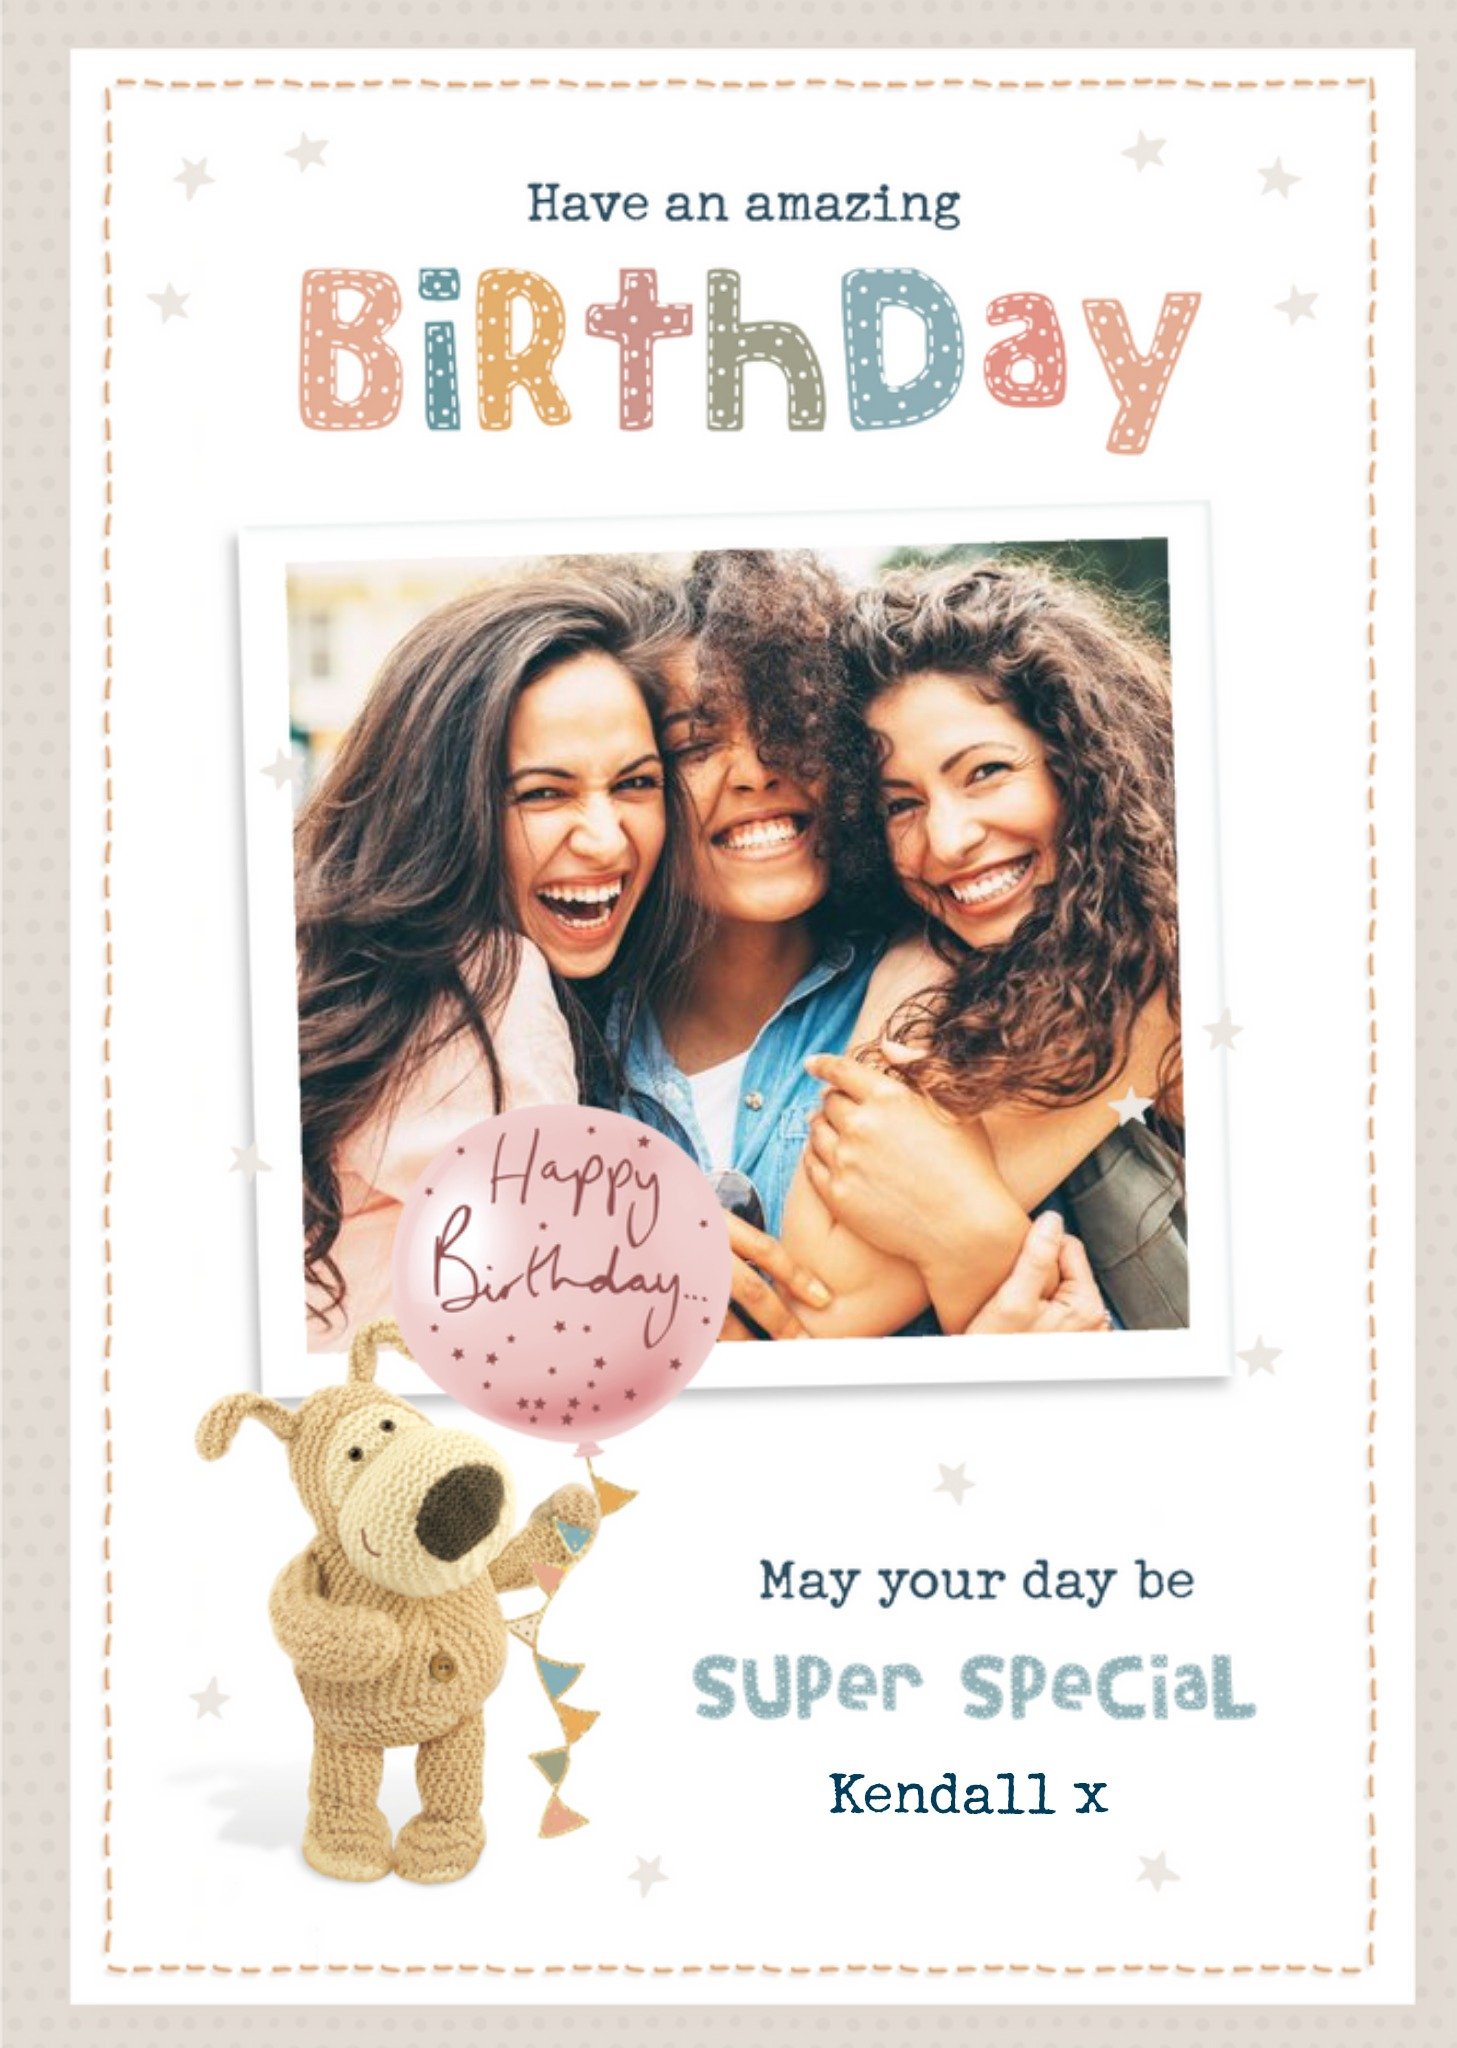 Cute Boofle Have An Amazing Birthday Photo Upload Birthday Card, Large